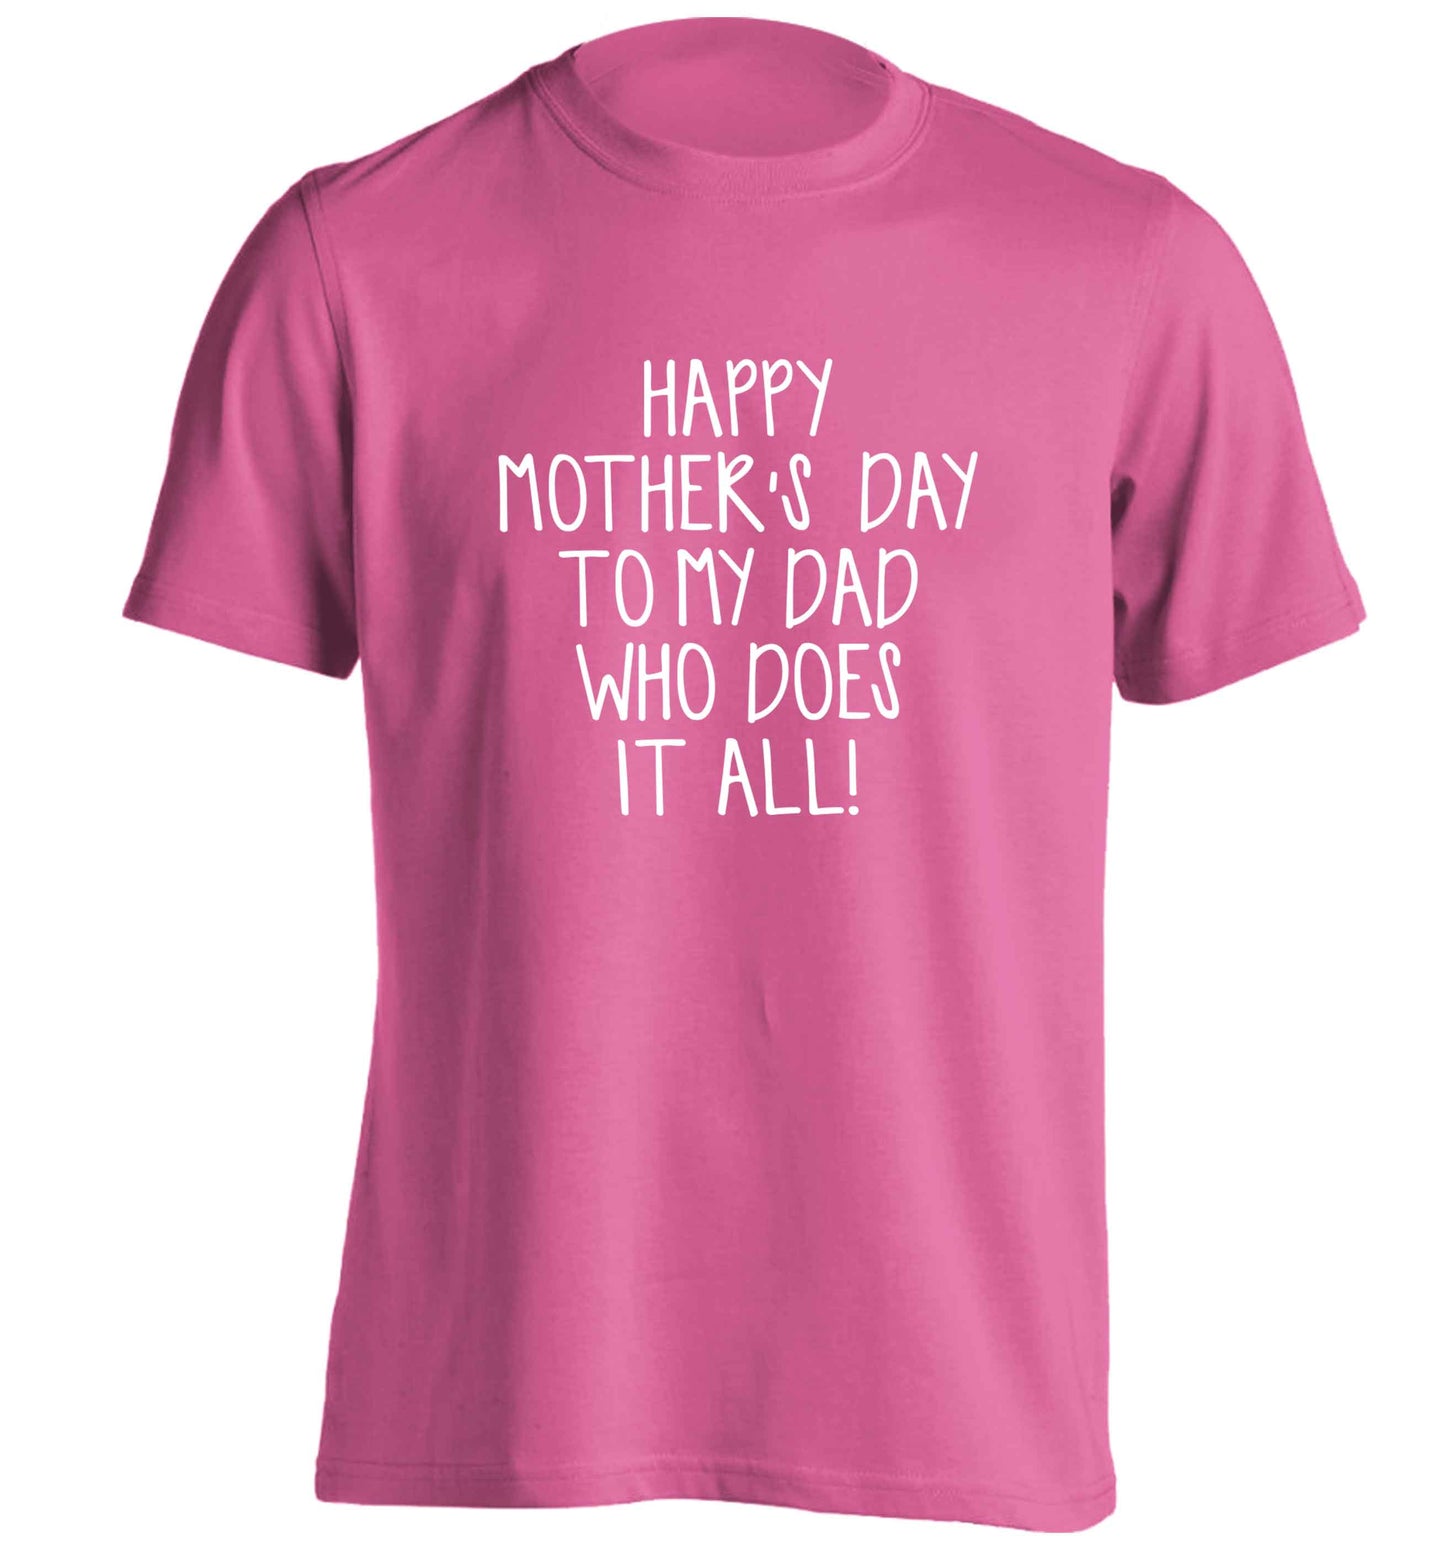 Happy mother's day to my dad who does it all! adults unisex pink Tshirt 2XL